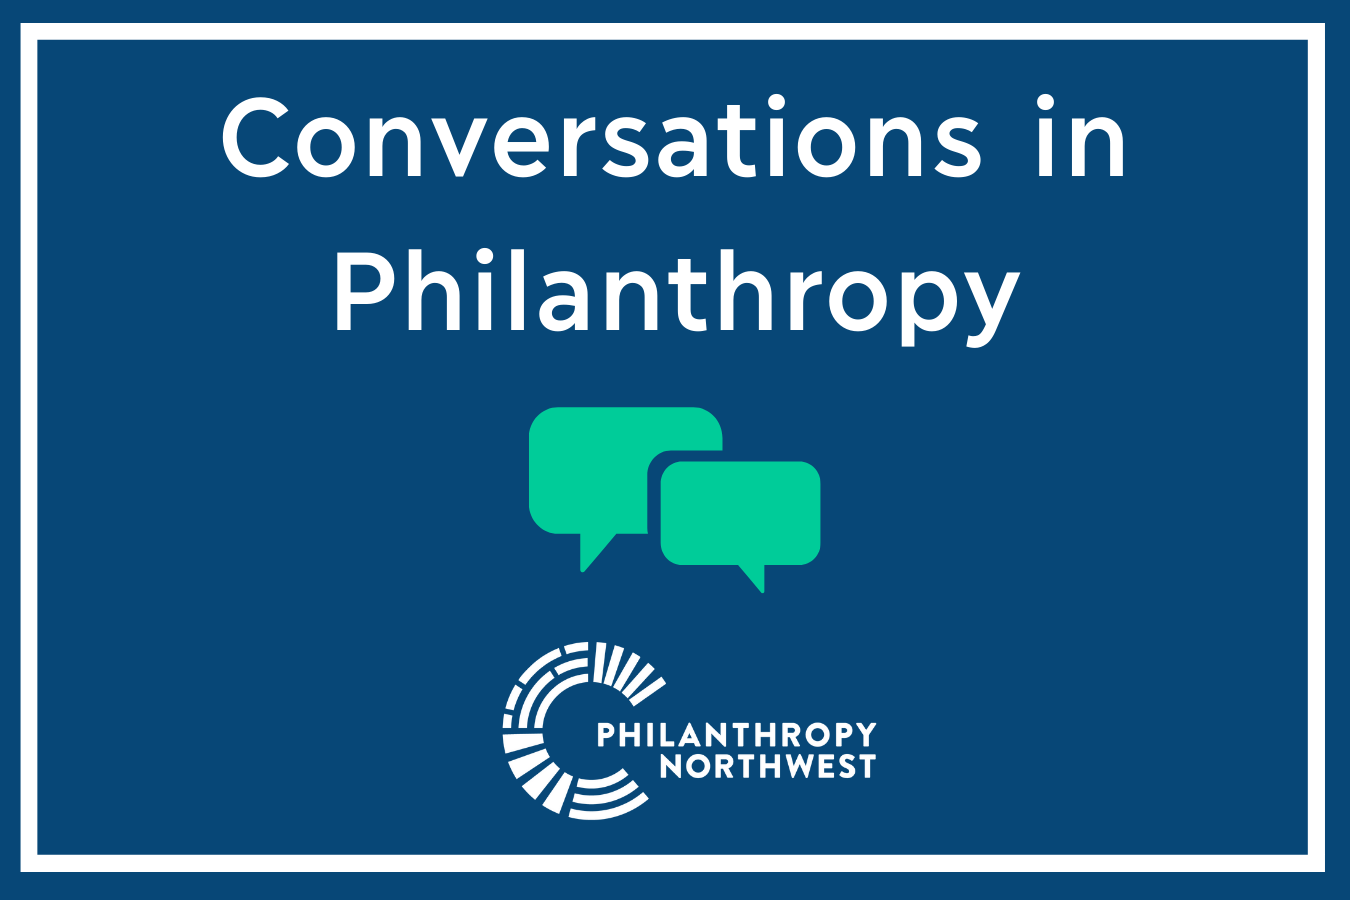 Conversations in Philanthropy Graphic with two green speech bubbles 